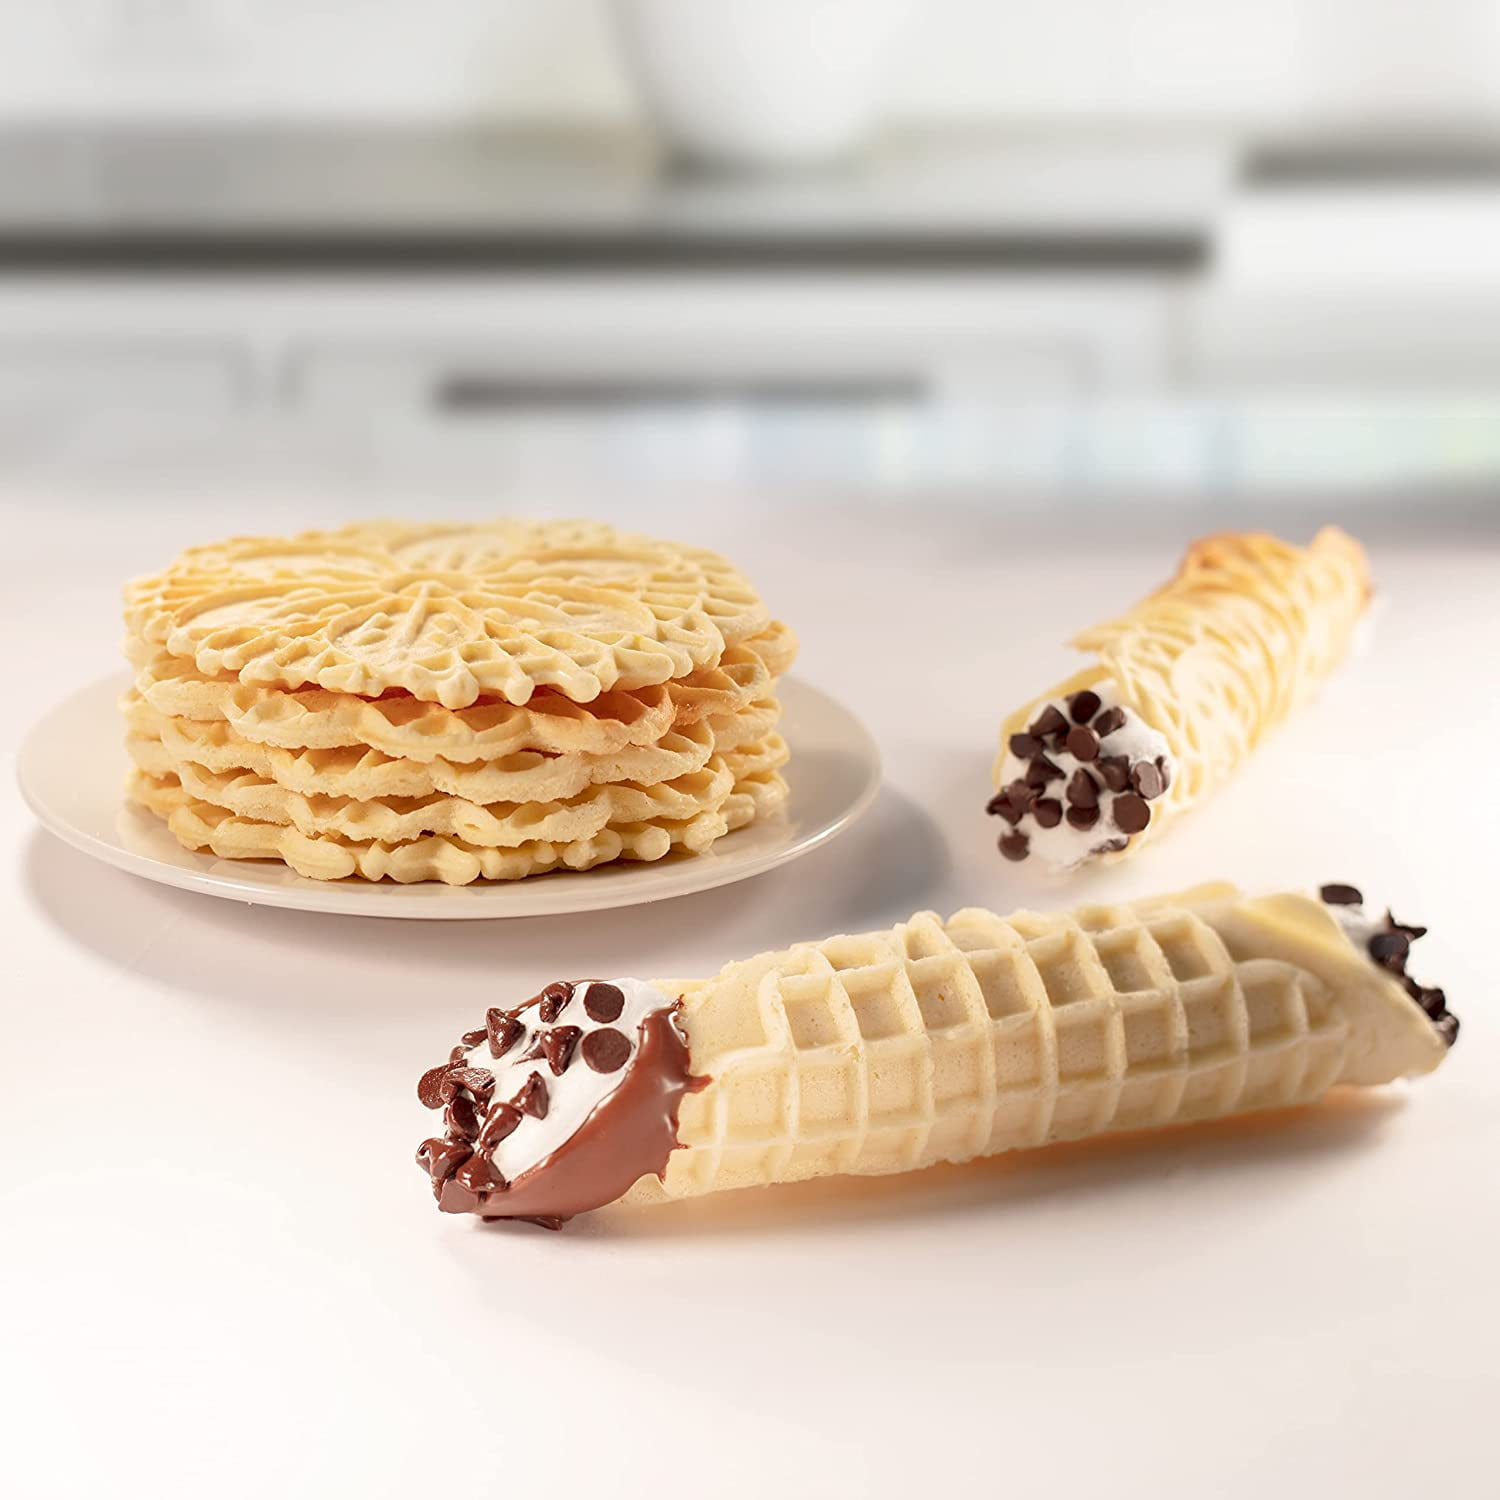 Pizzelle Maker - Non-stick Electric Pizzelle Baker Press Makes Two 5-Inch  Cookies at Once- Recipe Guide Included- Fun Party Dessert Treat Making Made